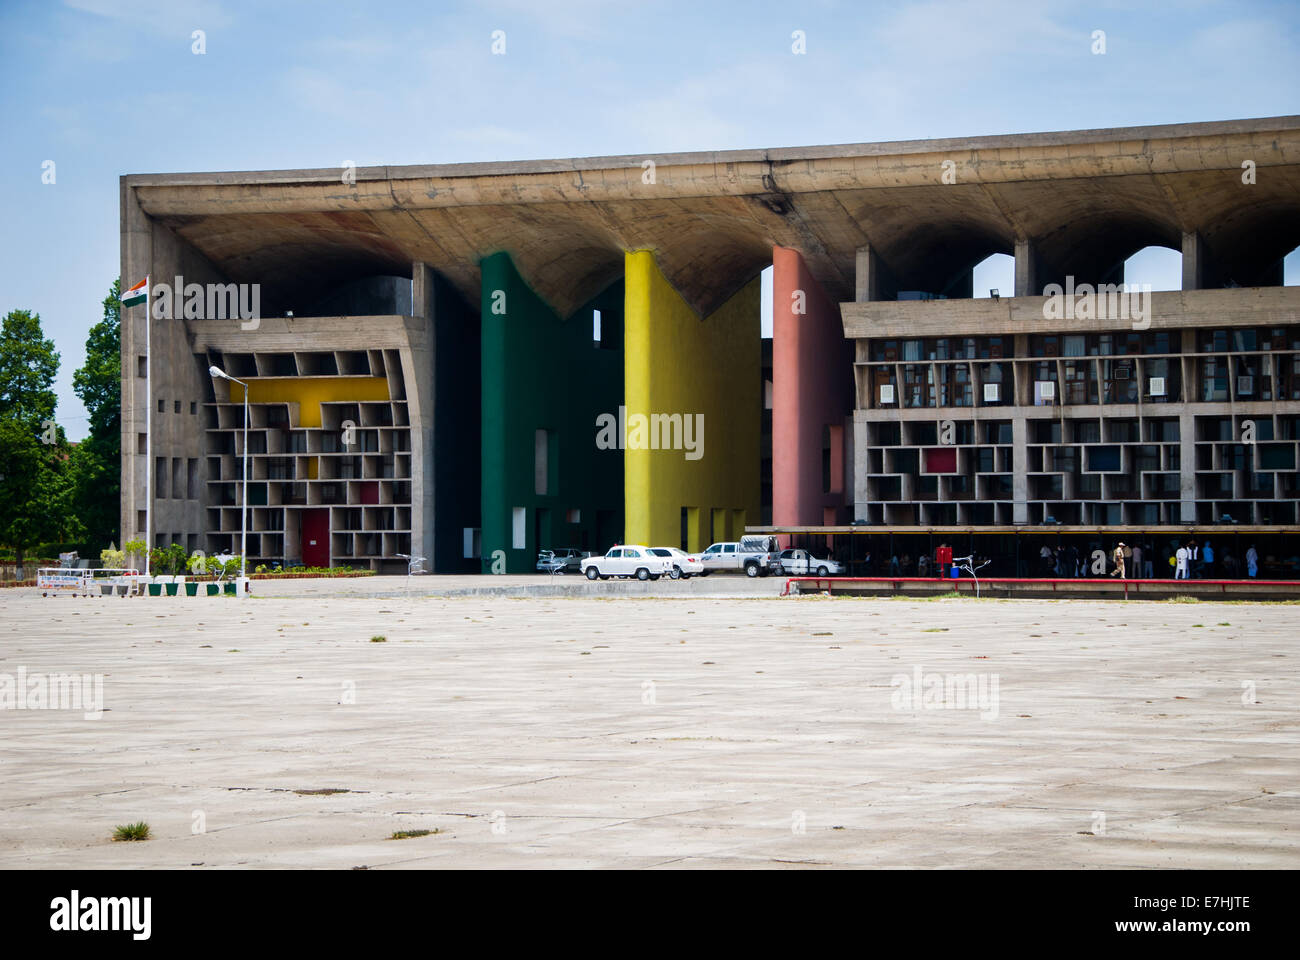 The High Court, designed by Swiss architect Le Corbusier, in Chandigarh, India Stock Photo